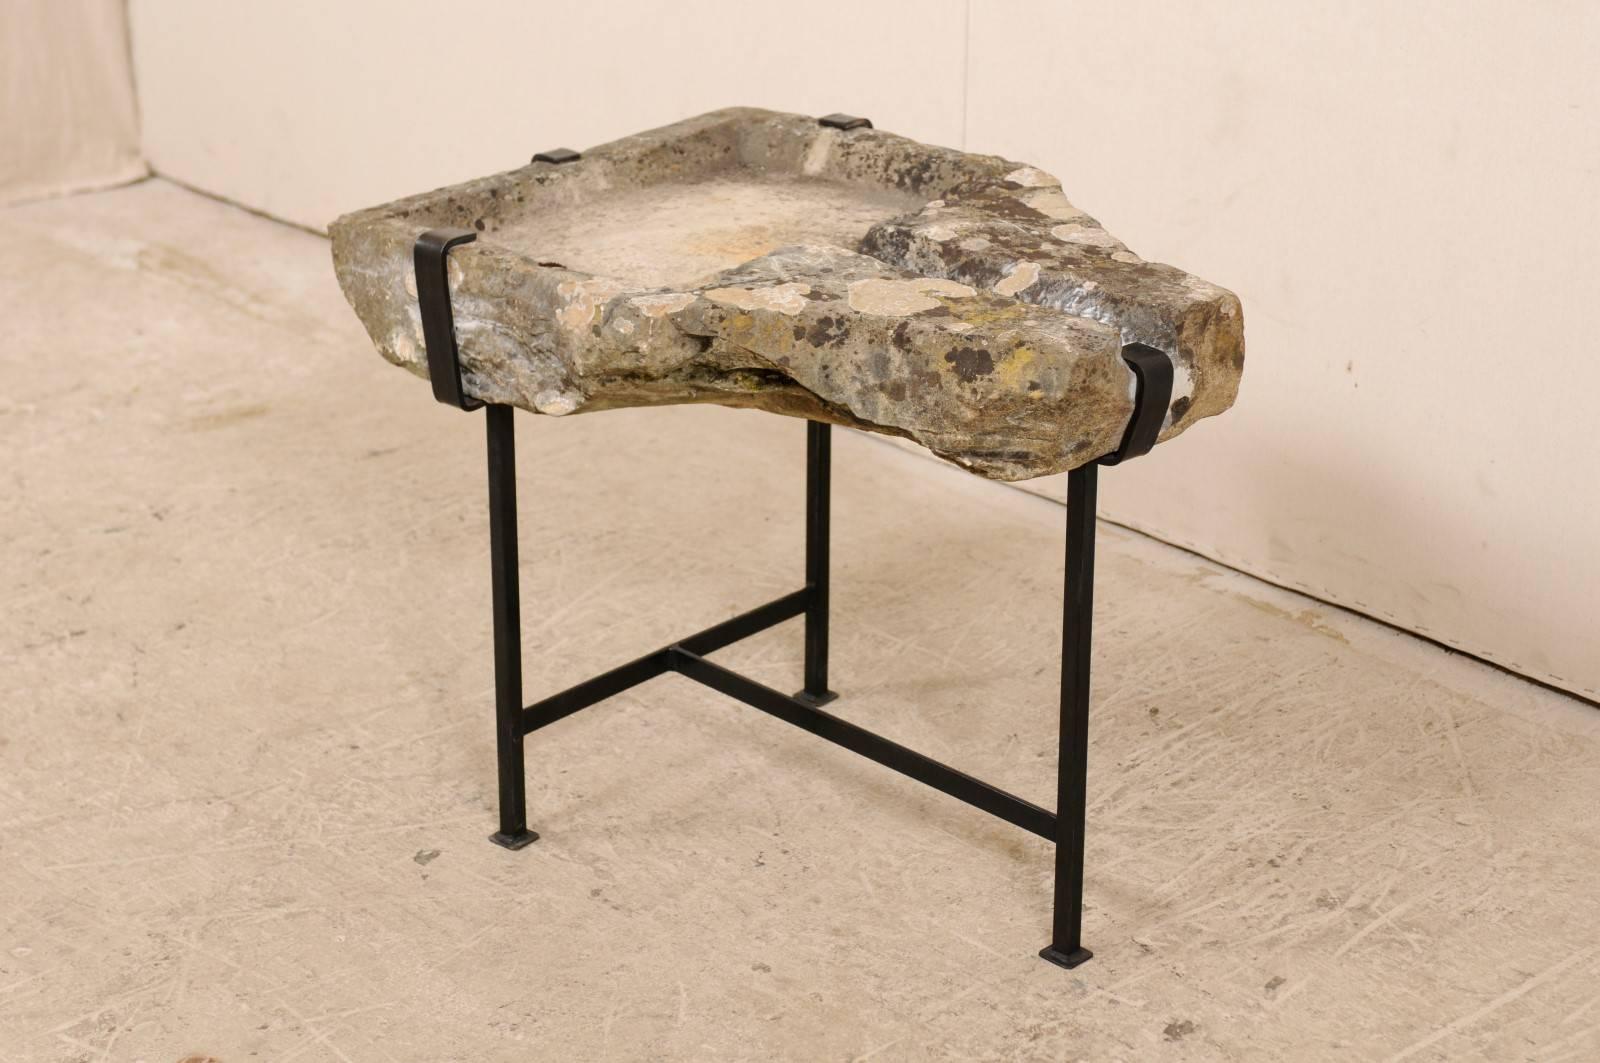 An early 19th century French stone trough coffee table on custom base. This unique coffee table features a top made from a French stone trough which dates back to the early 19th century (or possibly older). The stone trough top is supported by a